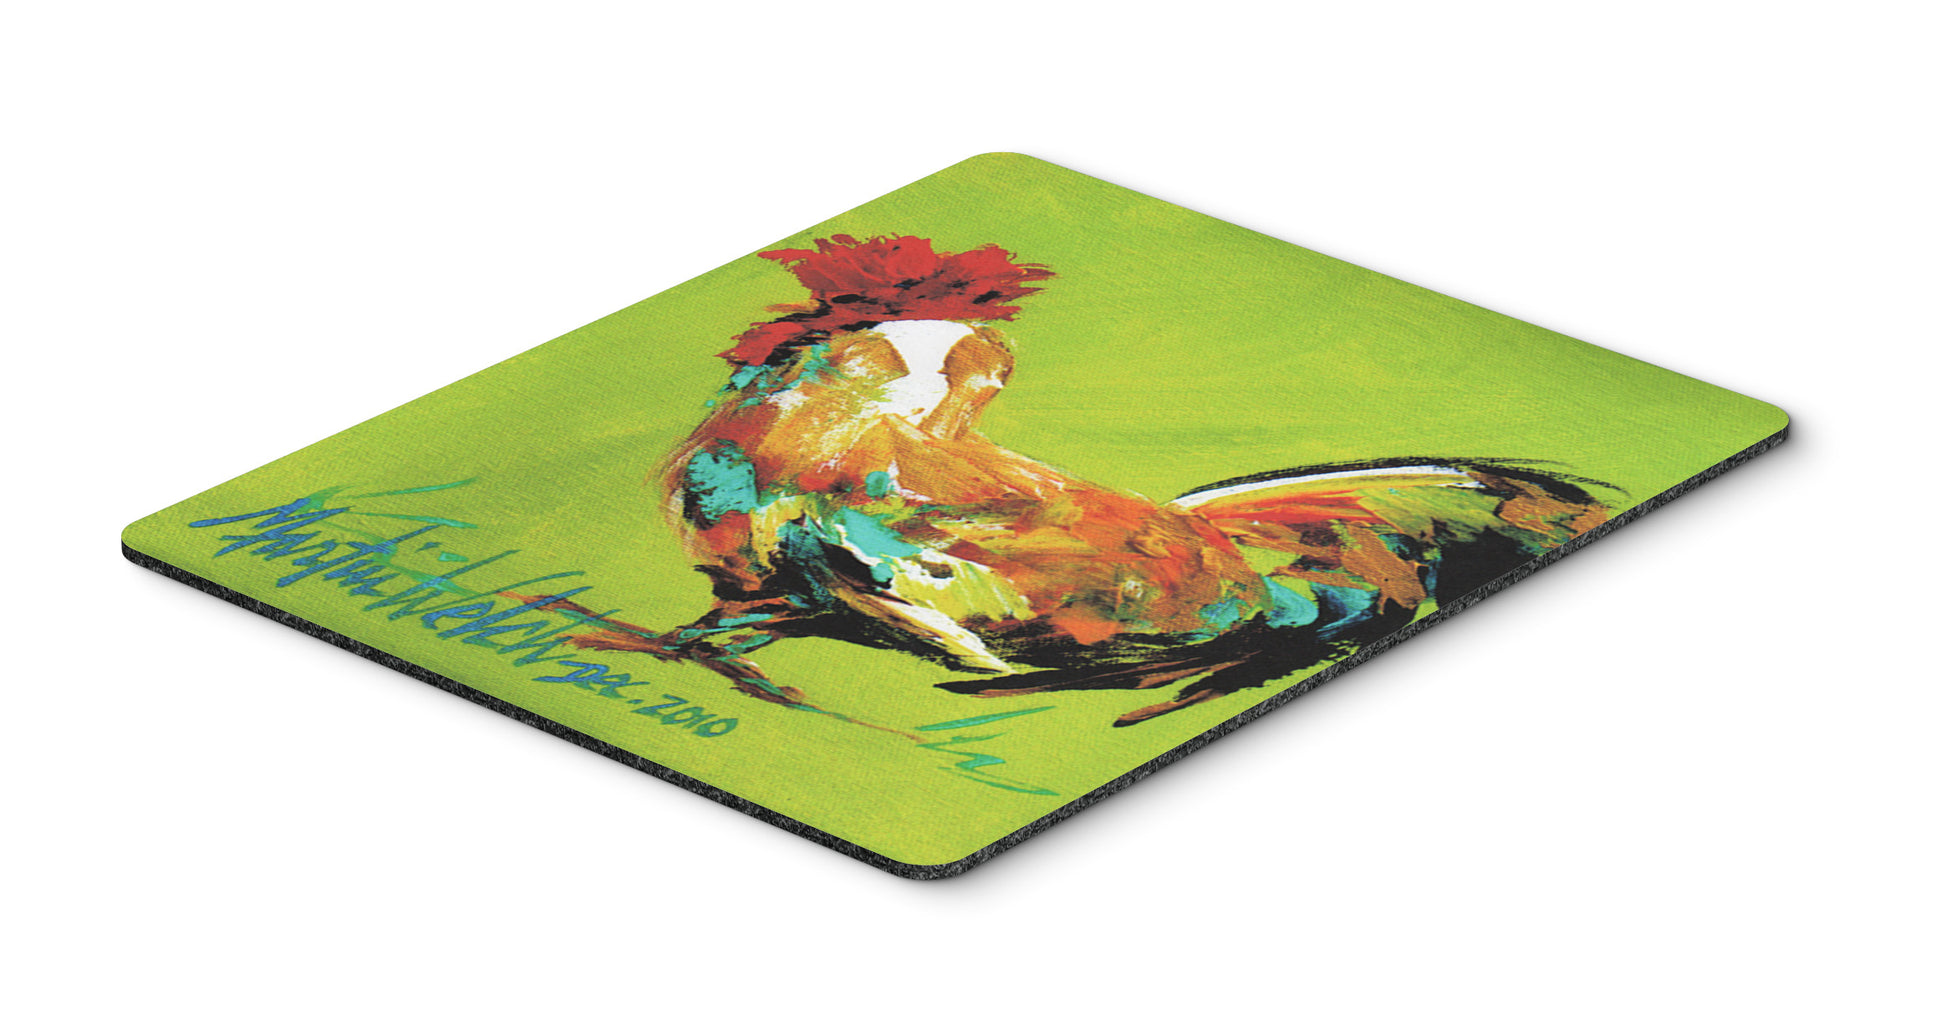 Buy this Cockadoo Rooster Mouse Pad, Hot Pad or Trivet